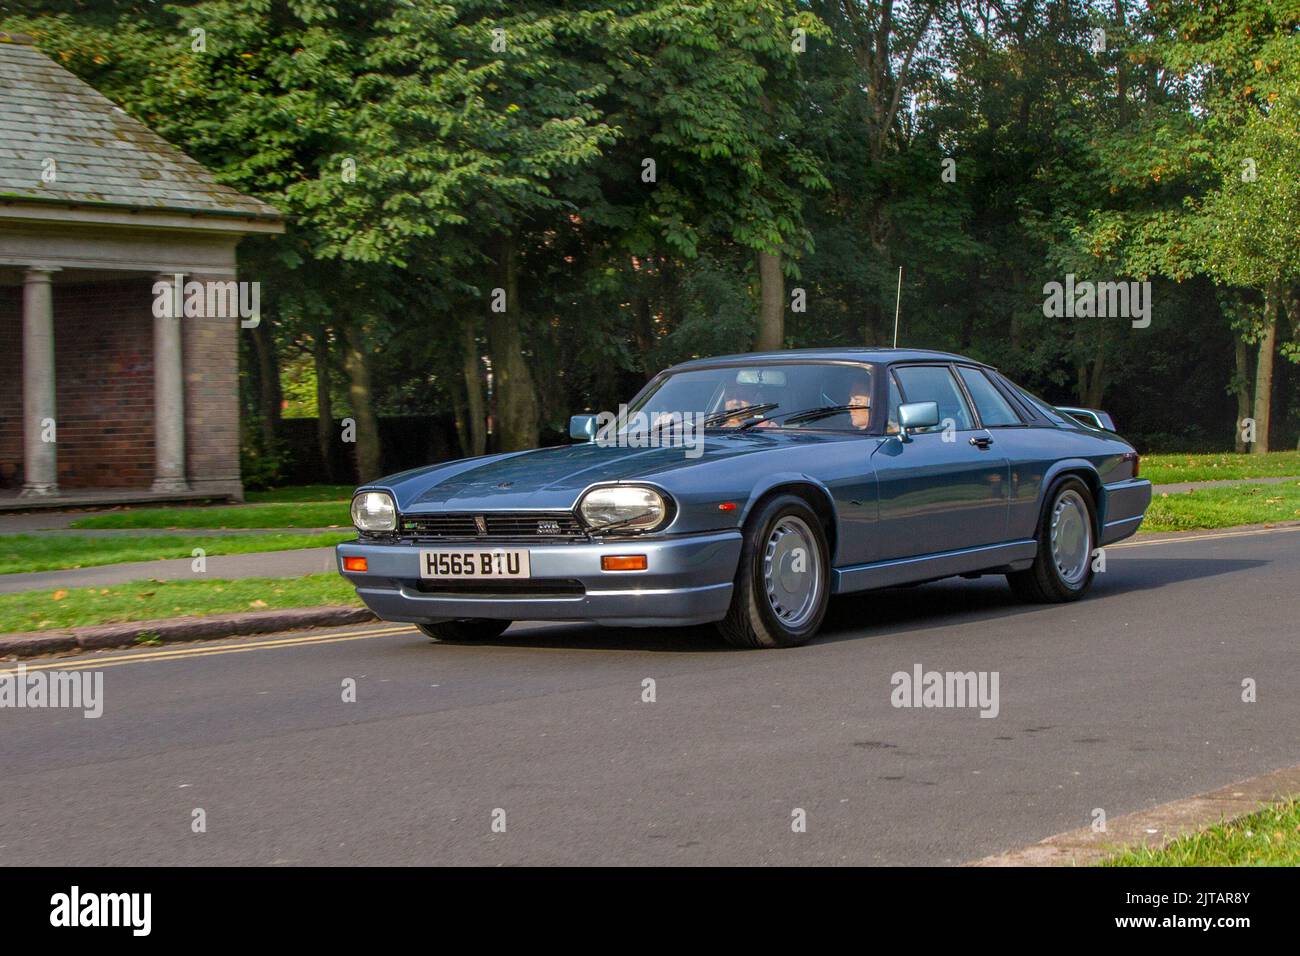 1990 90s nineties JAGUAR XJS SP XJR-S6L 5993cc 3 speed automatic; Cars arriving at the annual Stanley Park Classic Car Show in the Italian Gardens. Stanley Park classics yesteryear Motor Show Hosted By Blackpool Vintage Vehicle Preservation Group, UK. Stock Photo